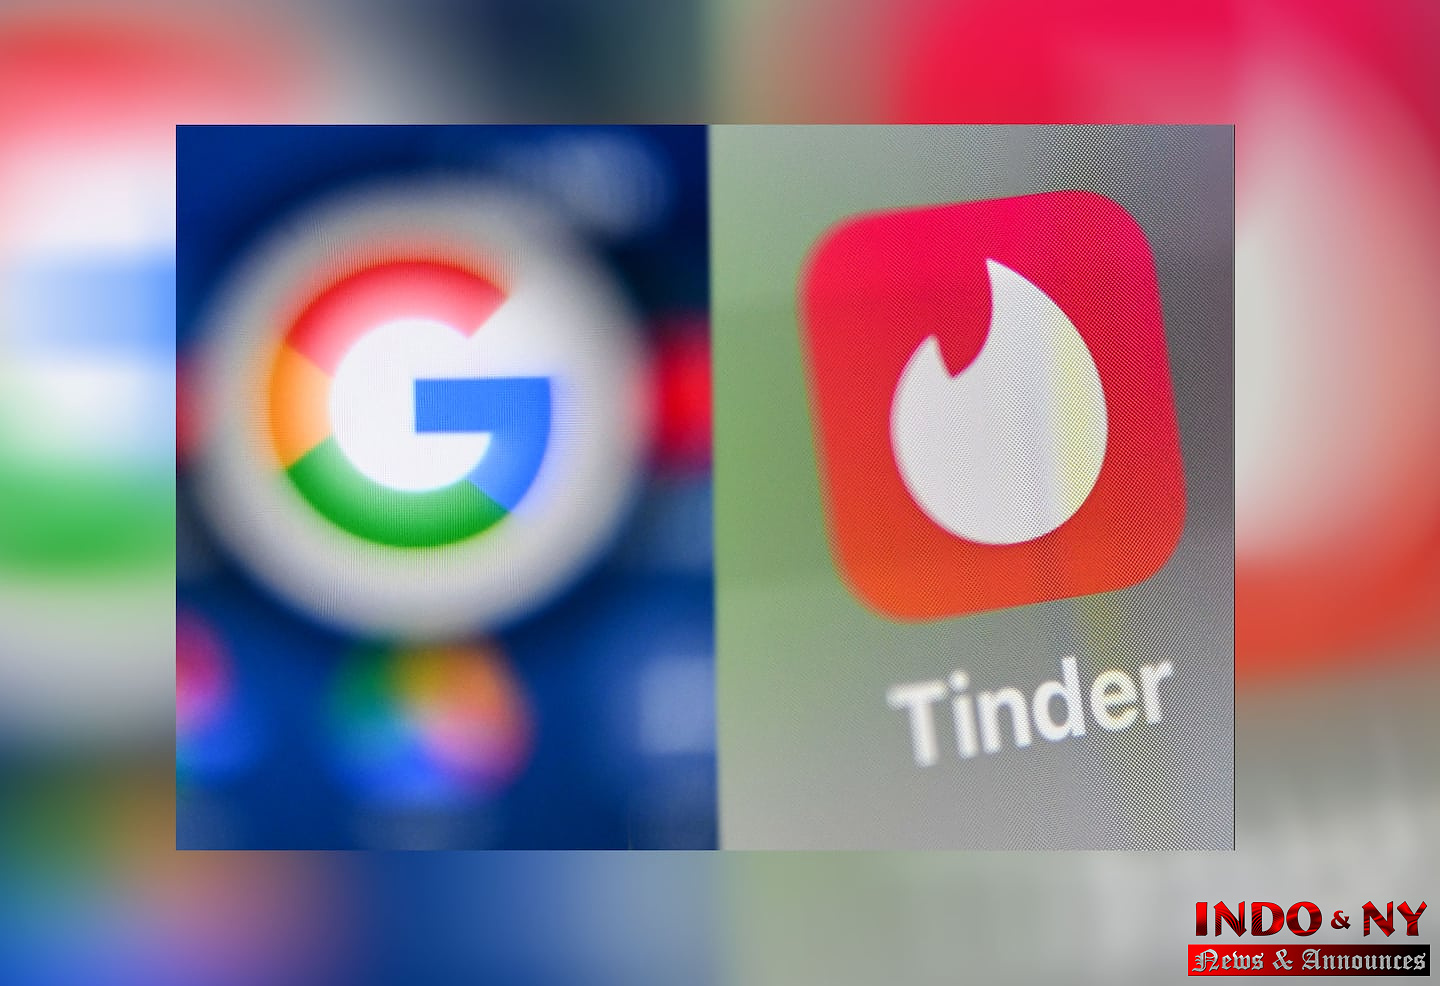 Tinder sues Google for abuse of dominance